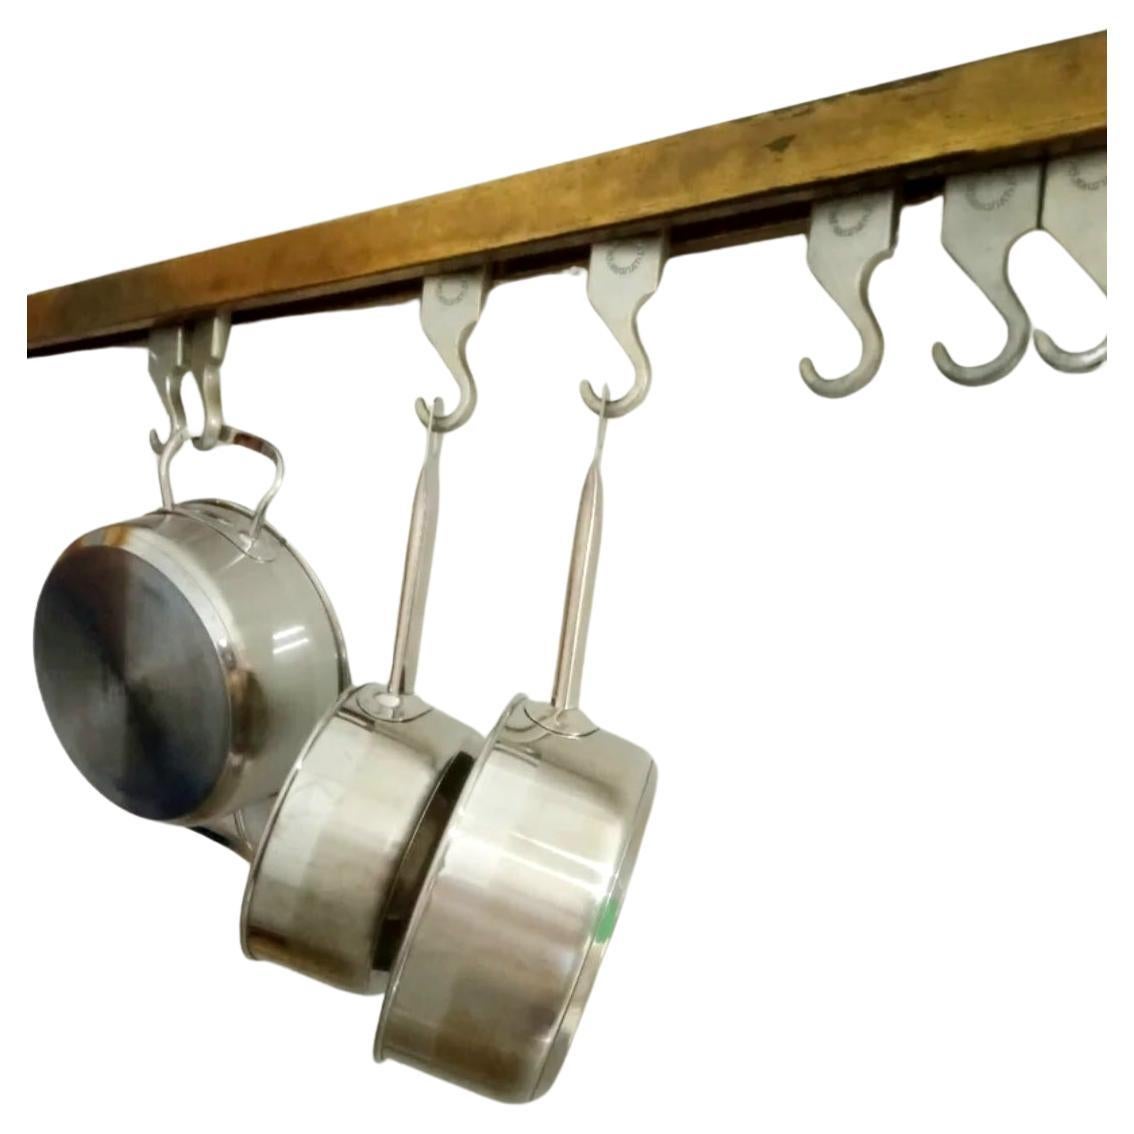 Butcher Hanger  Brass and Steel Whit 7 Movable Hooks.Industrial  Large Size 92cm